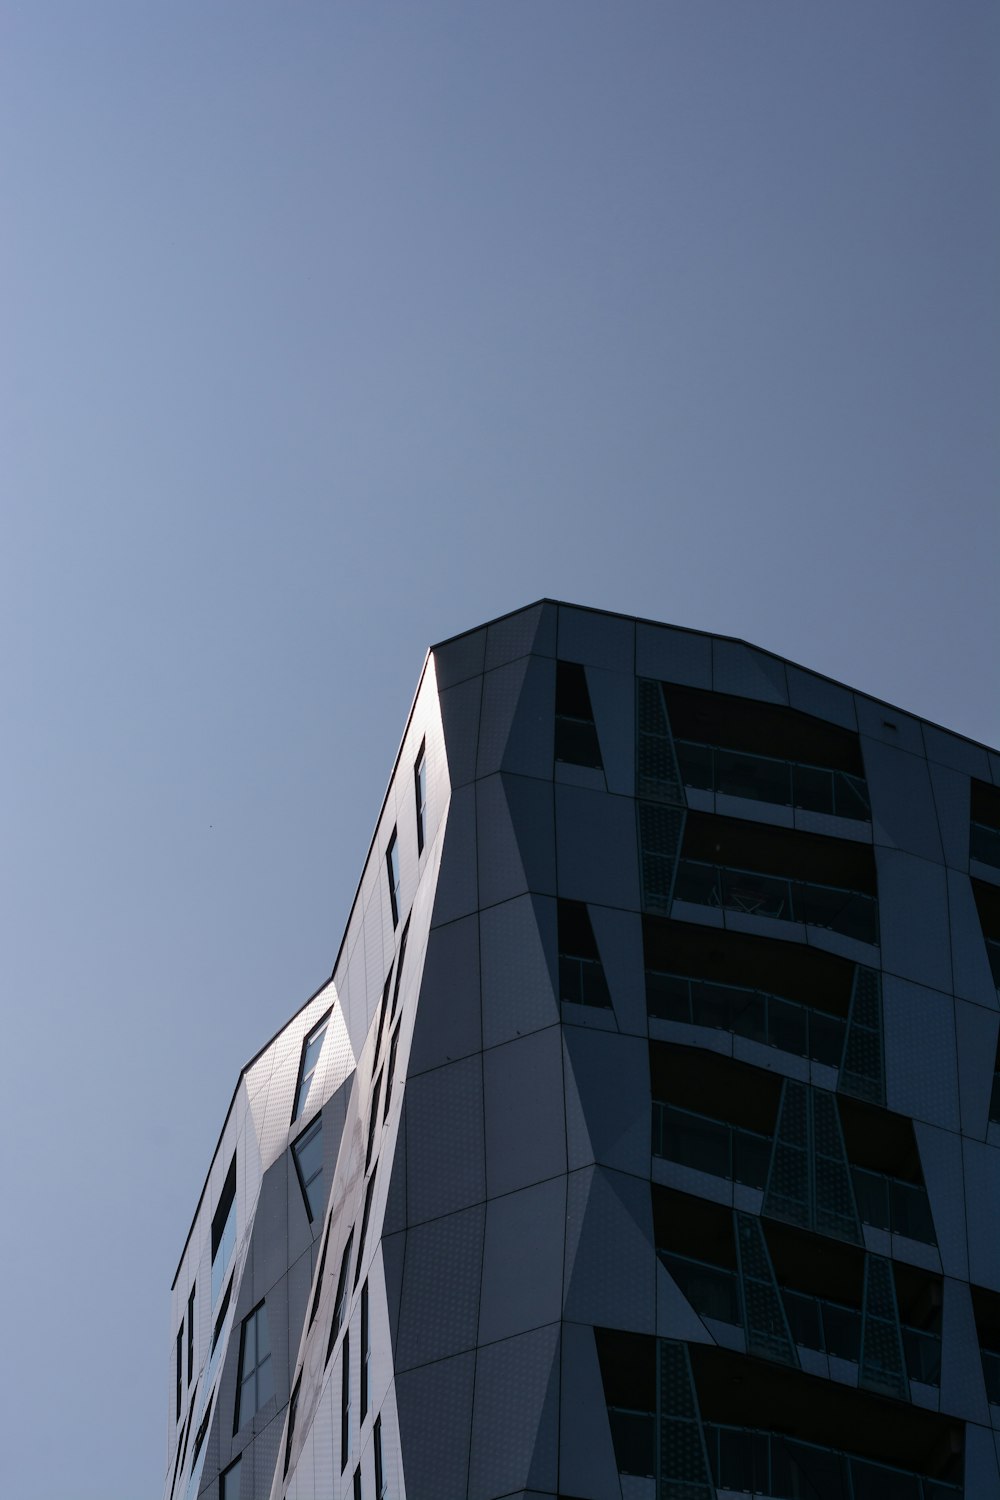 gray and black glass walled building